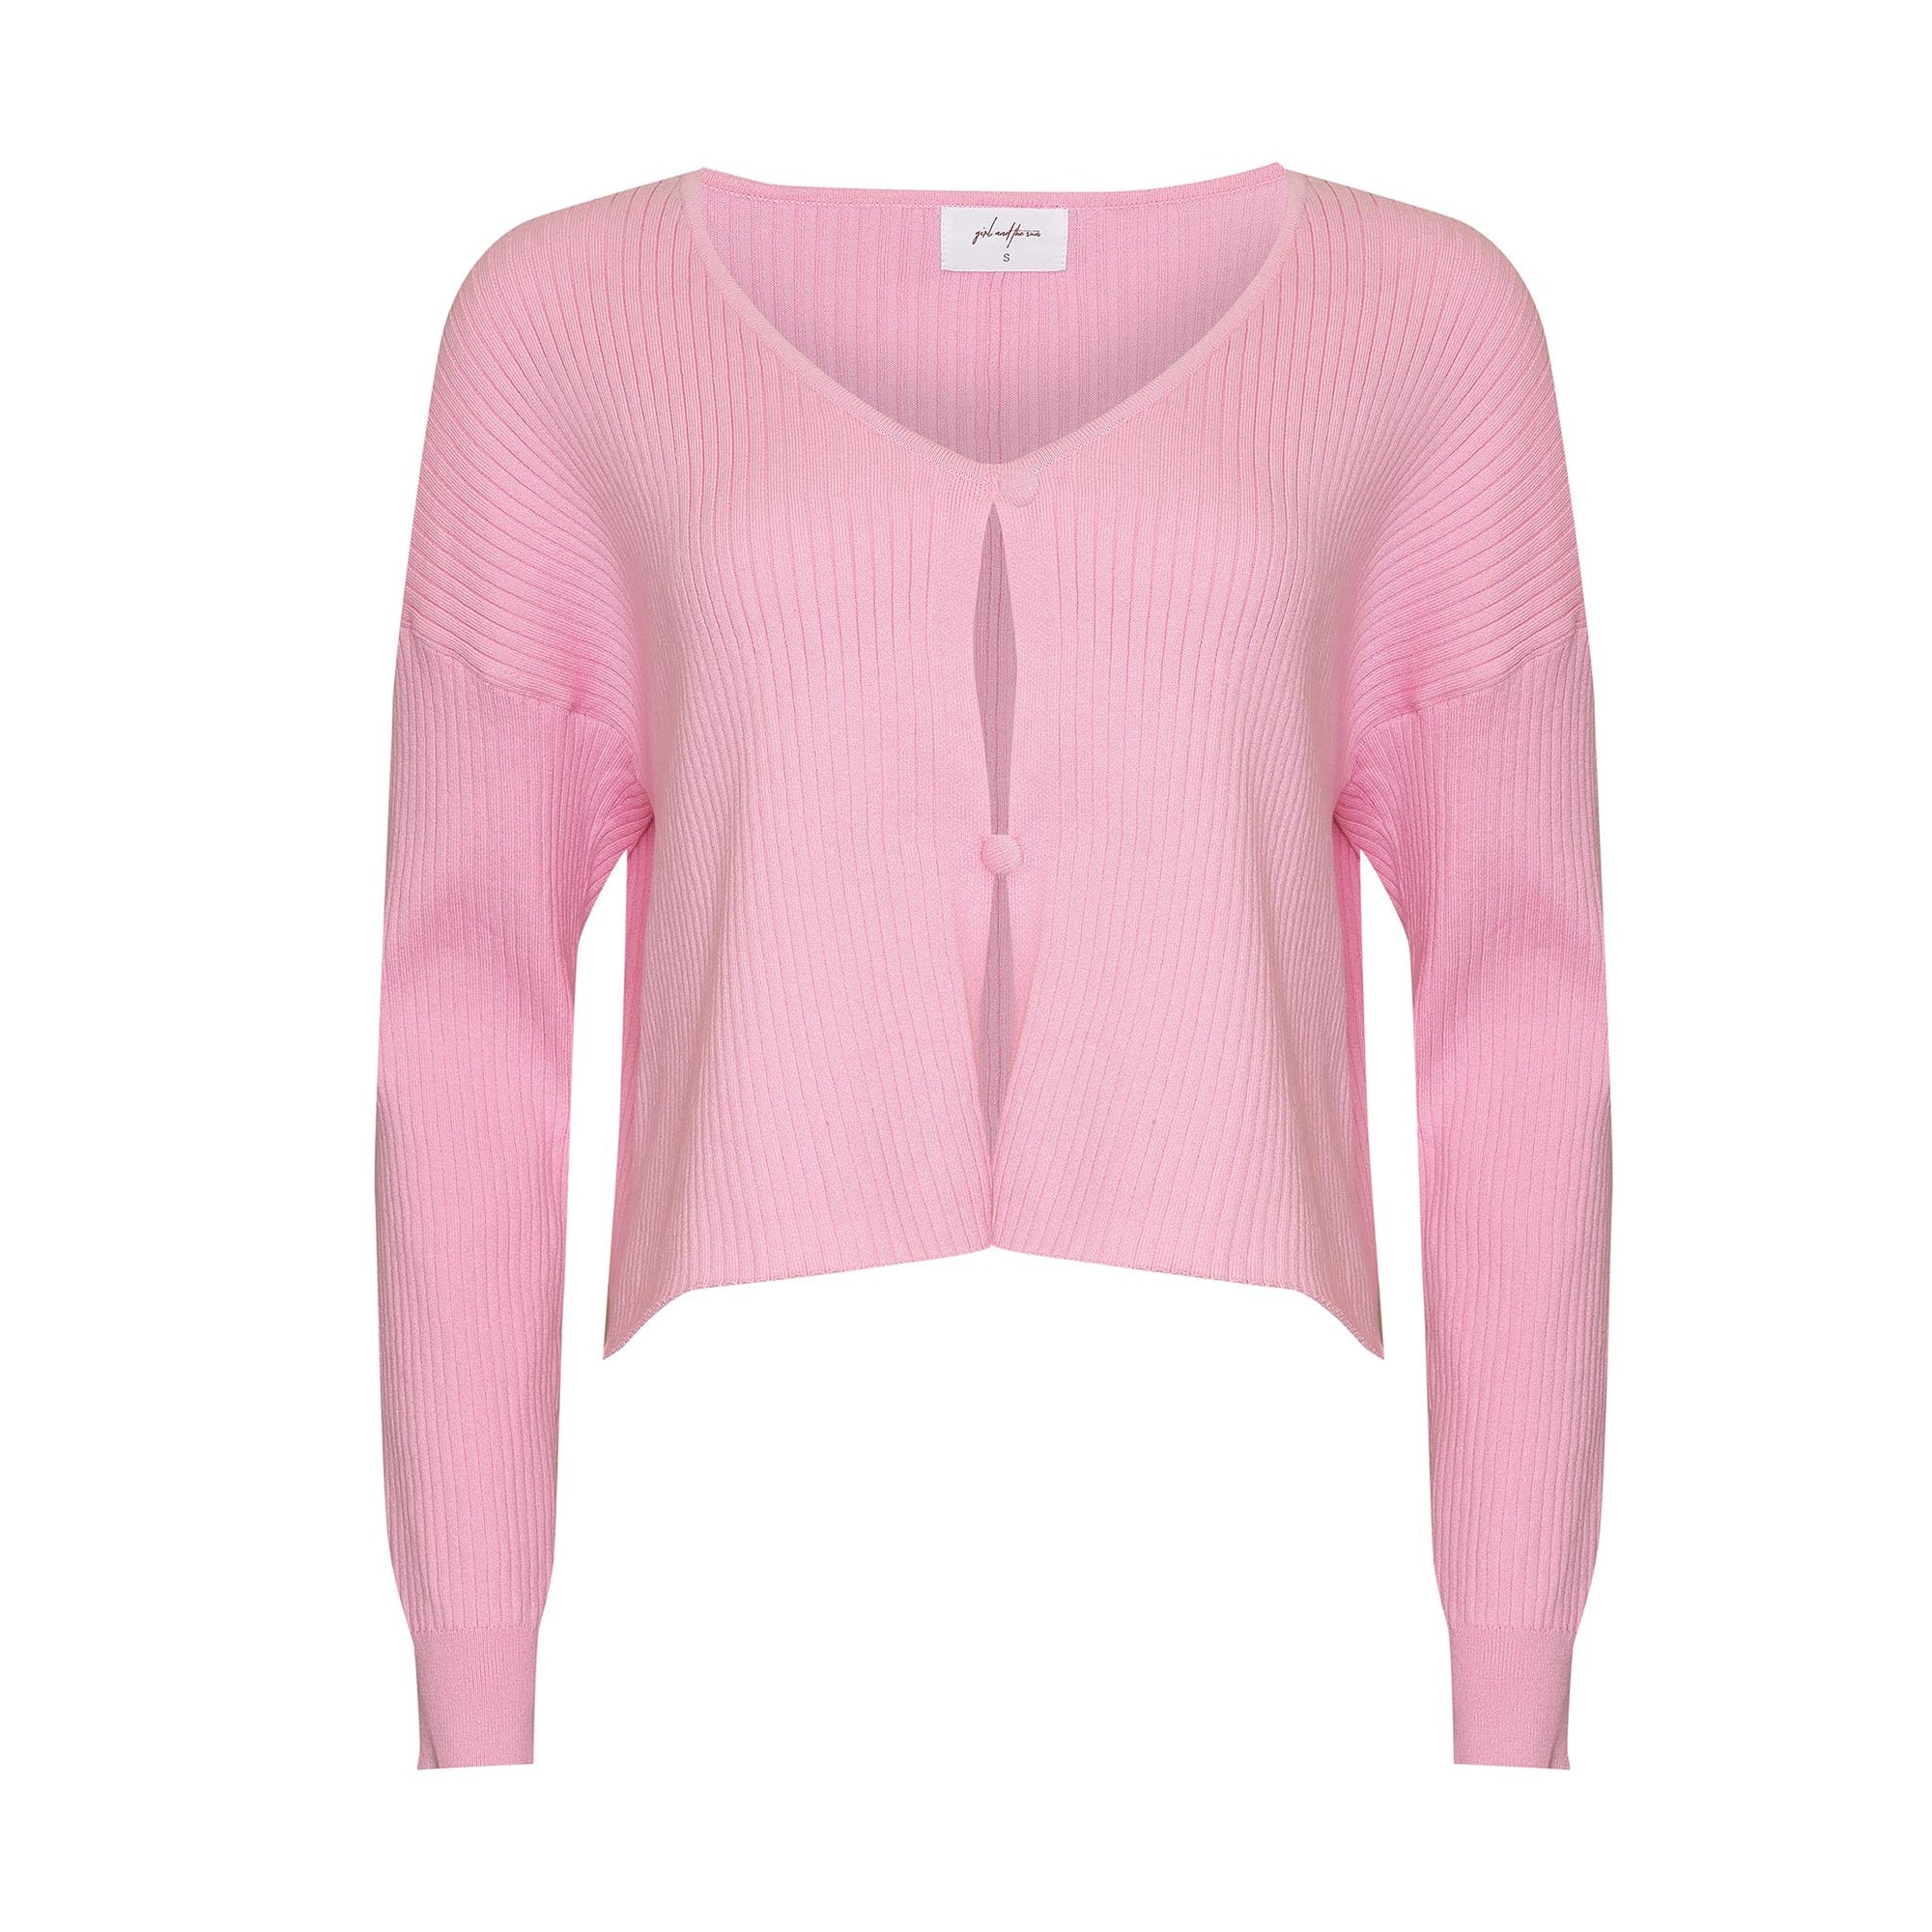 VERONICA KNIT - BRIGHT PINK